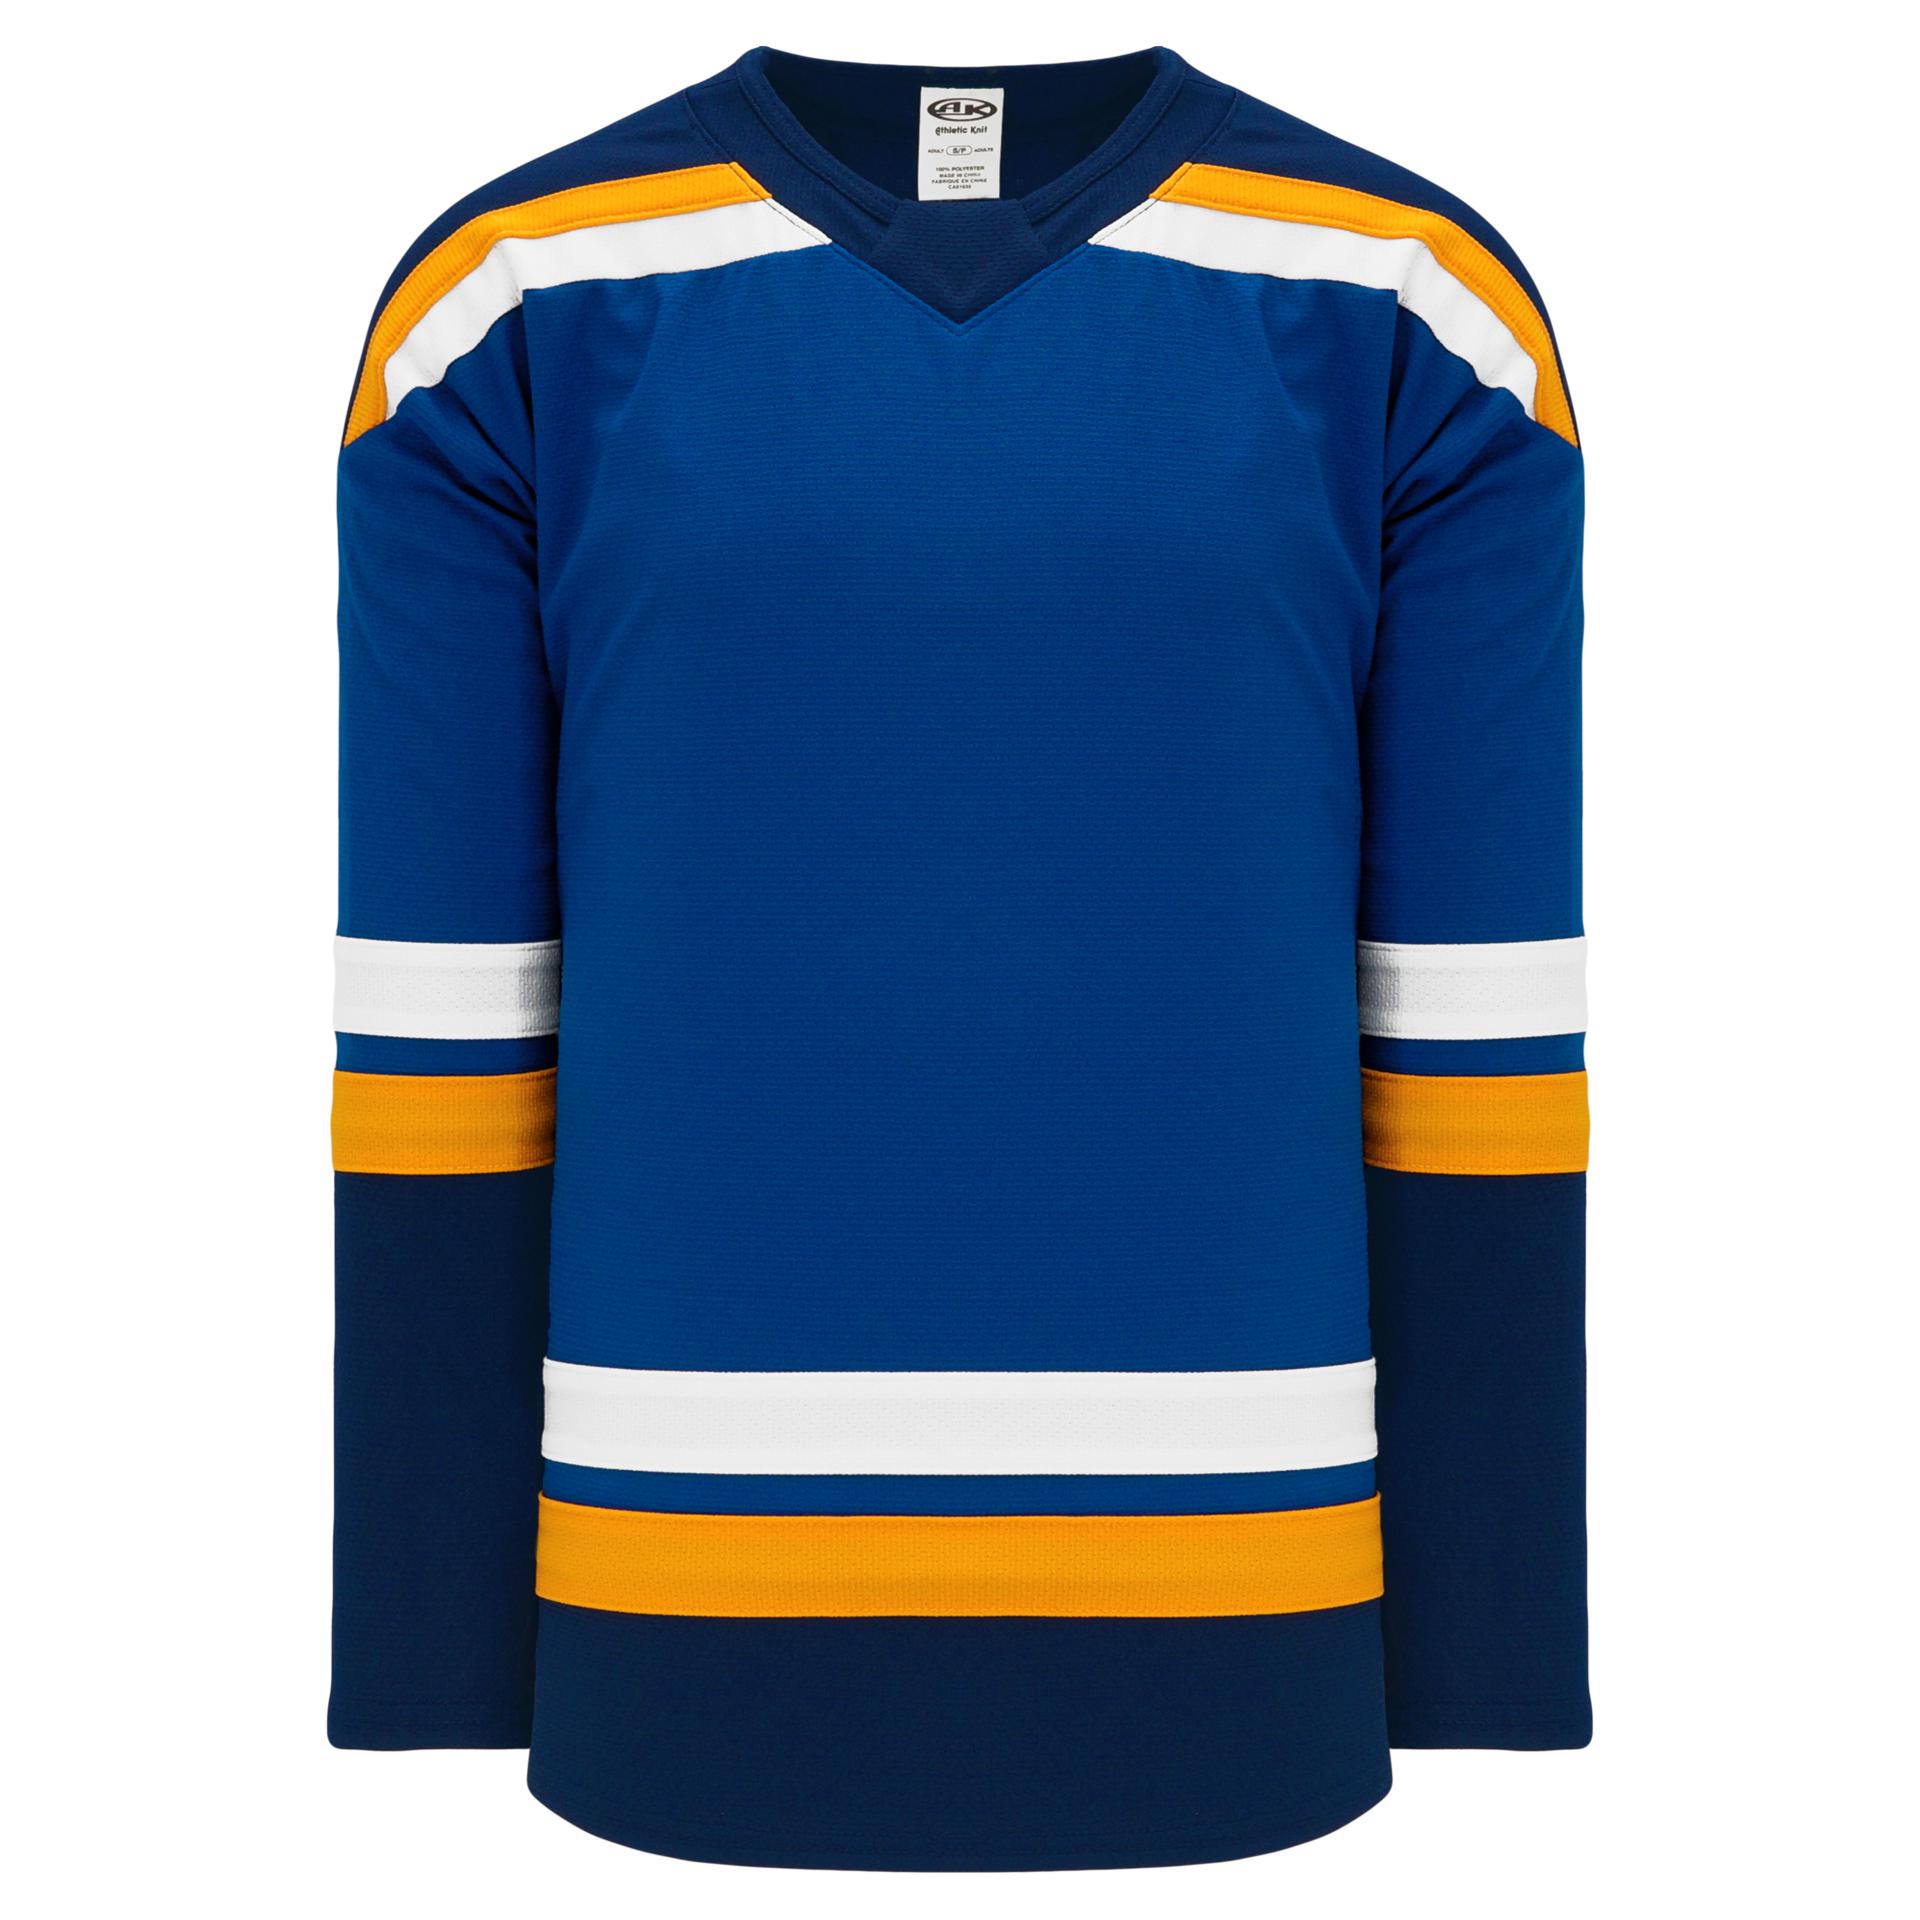 Athletic Knit (AK) H550BY-STL557B New Youth 2016 St. Louis Blues Winter Classic Blue Hockey Jersey Large